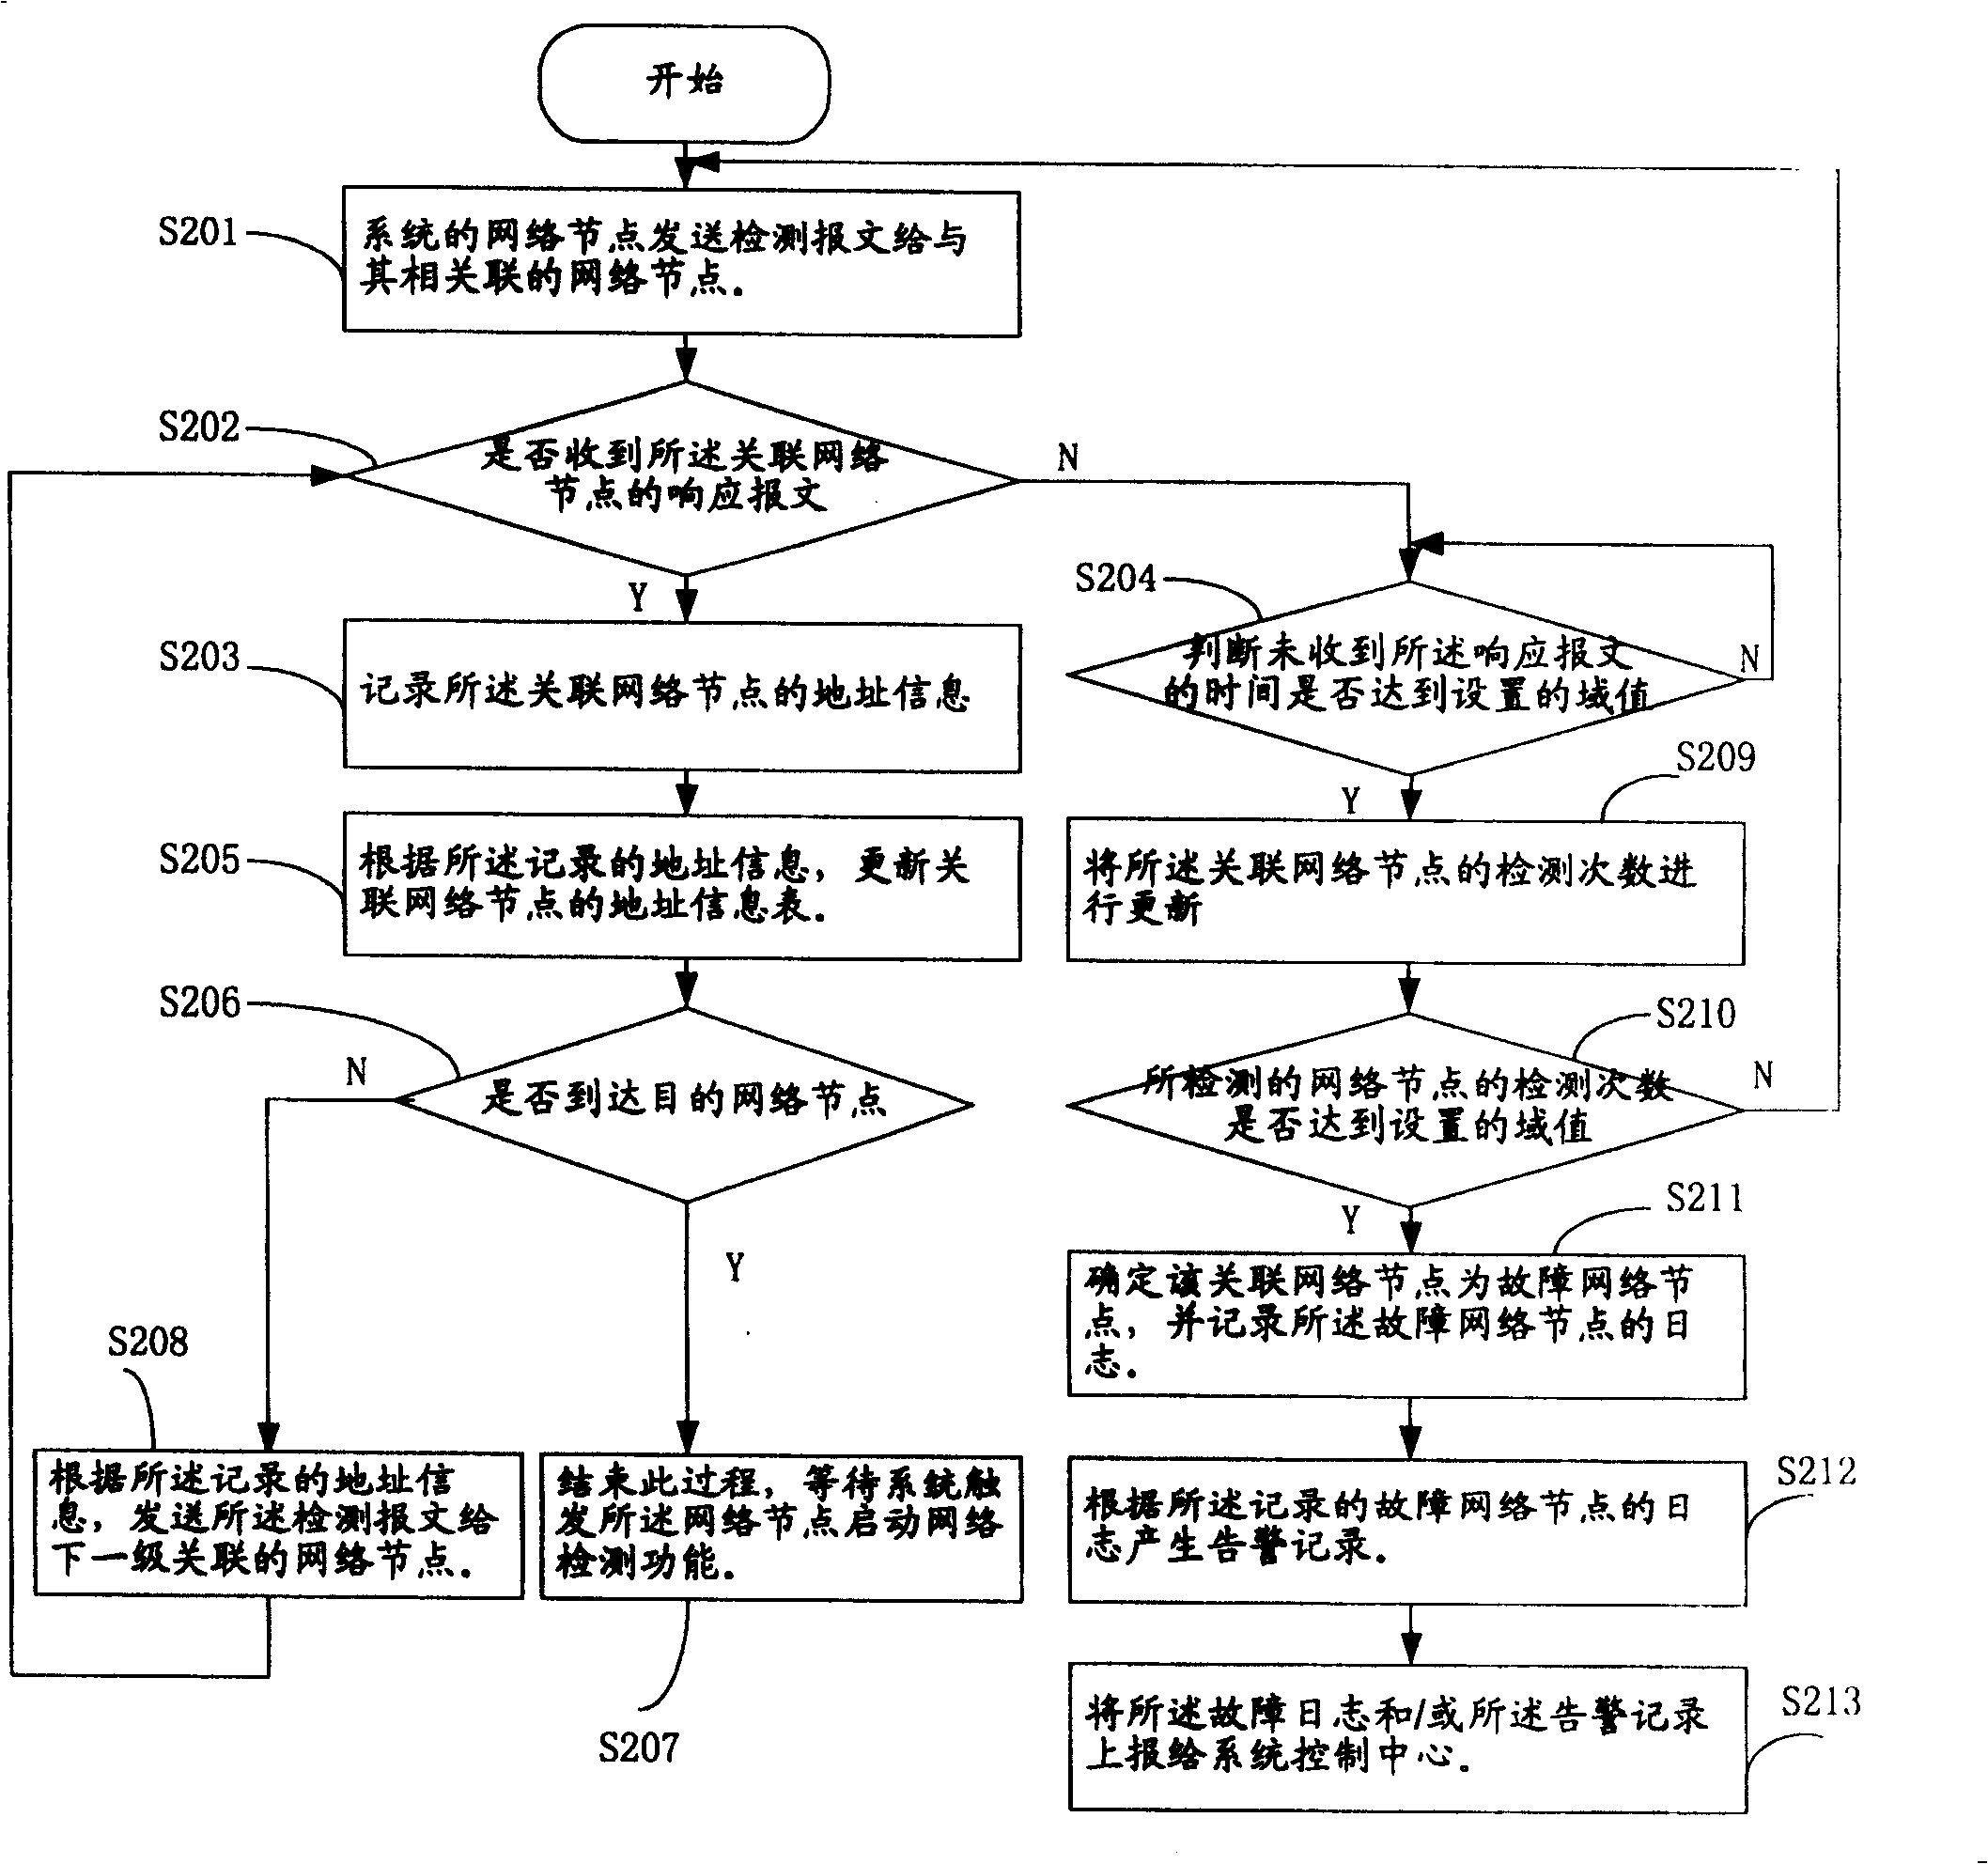 Method for recognizing failure node in network